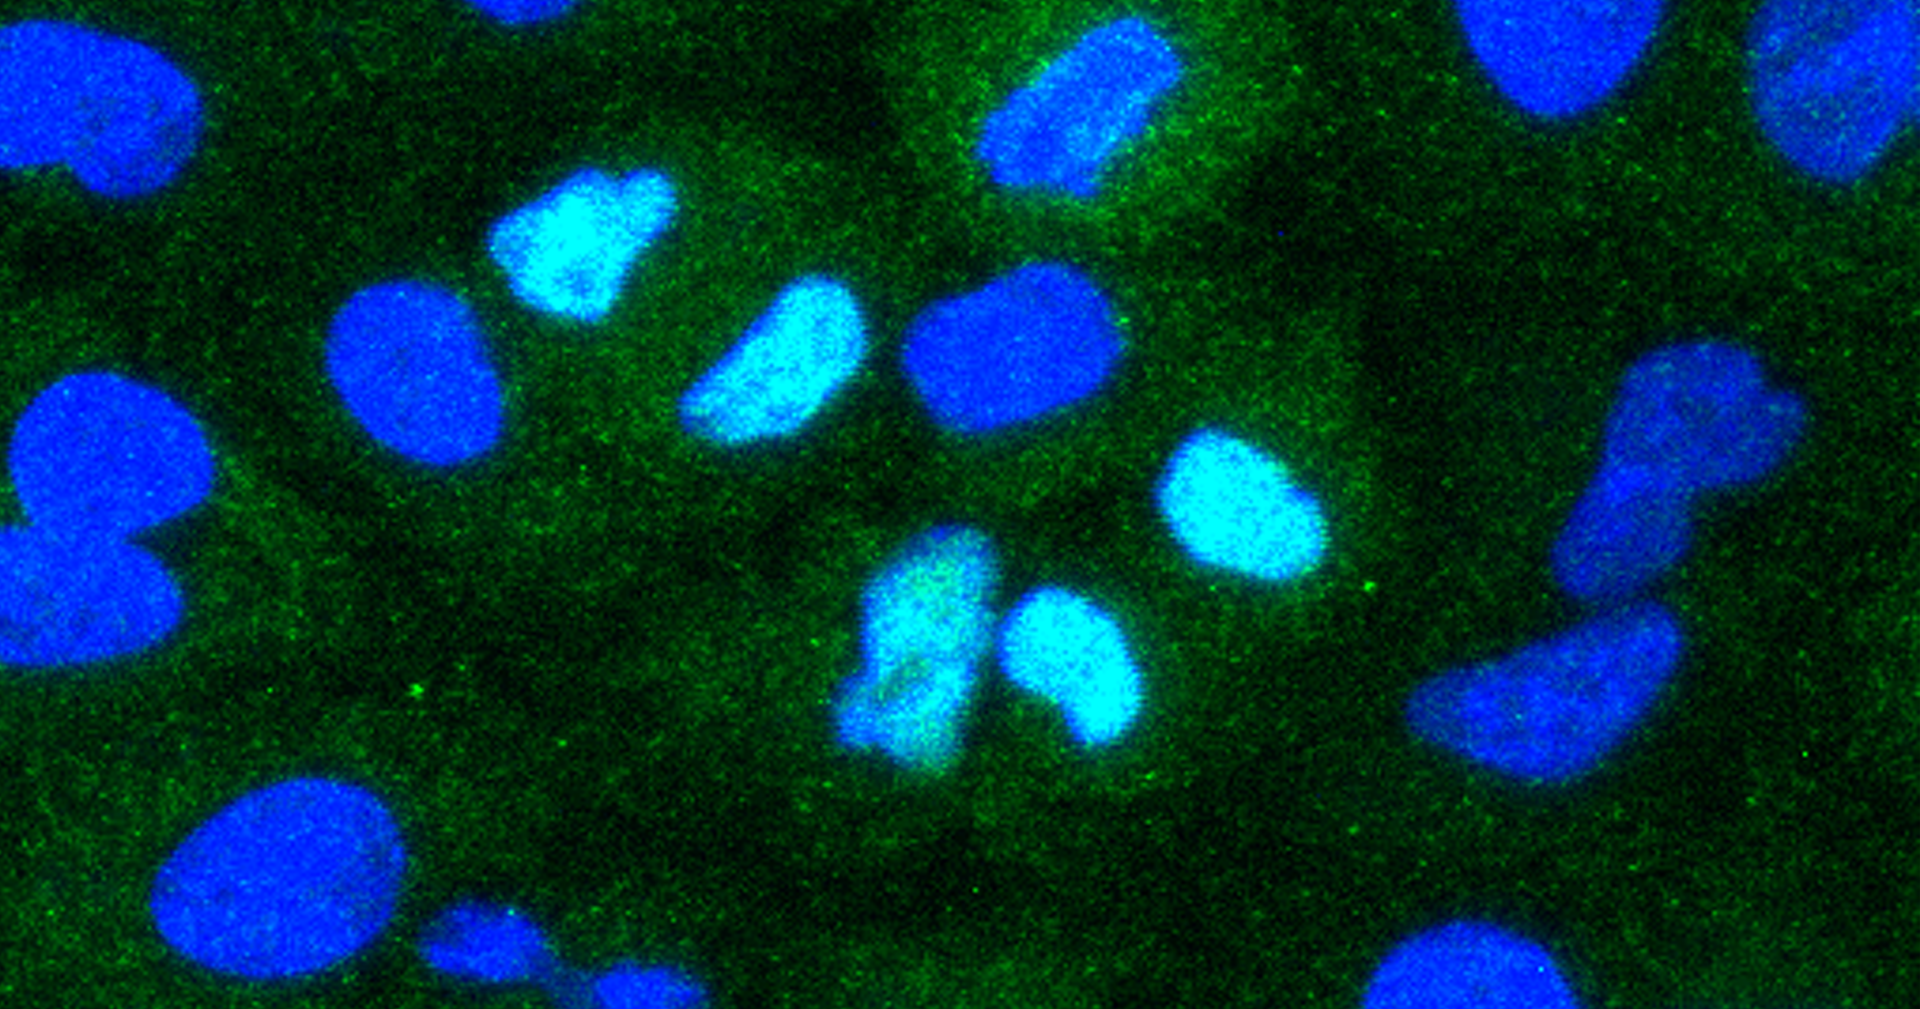 The introduction of the novel dsRNAs into living cells induces IFN-I production in cells’ nuclei (right, in light blue), while the introduction of scrambled control dsRNA does not (left). Credit: Wyss Institute at Harvard University